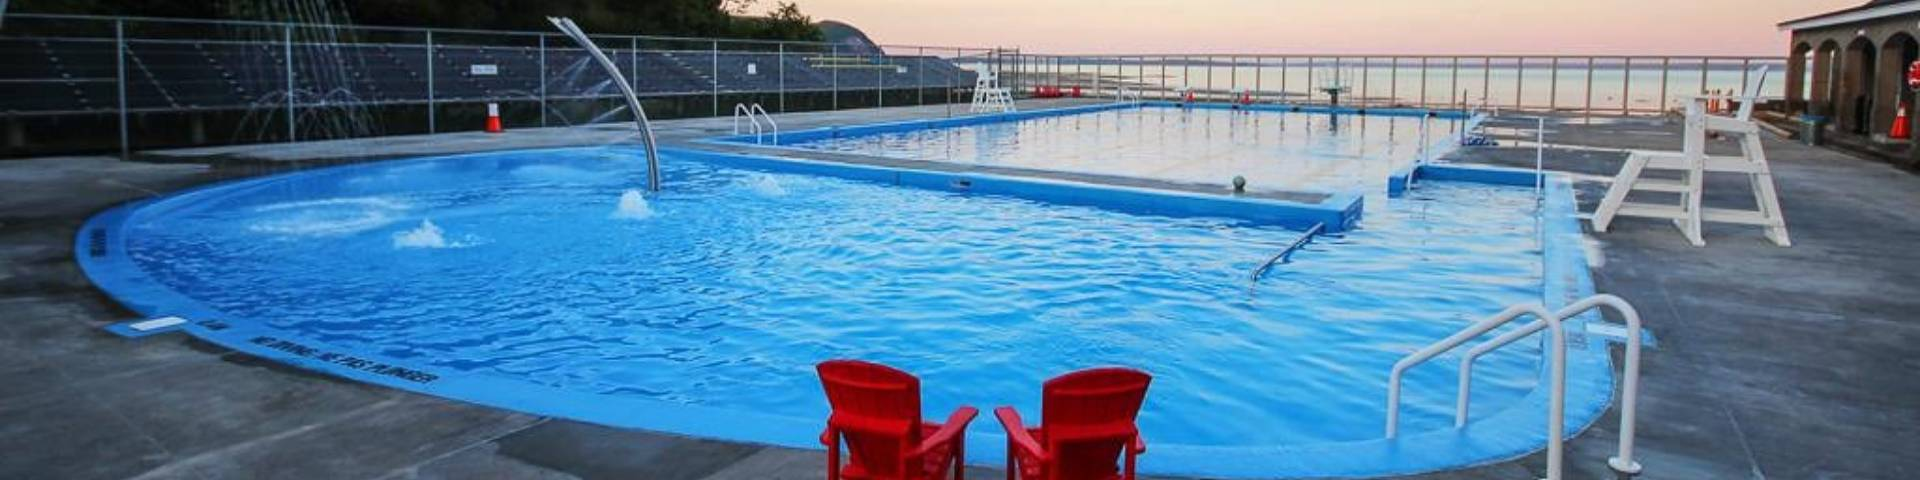 Easy access to saltwater pool, ask the main visitor center about it